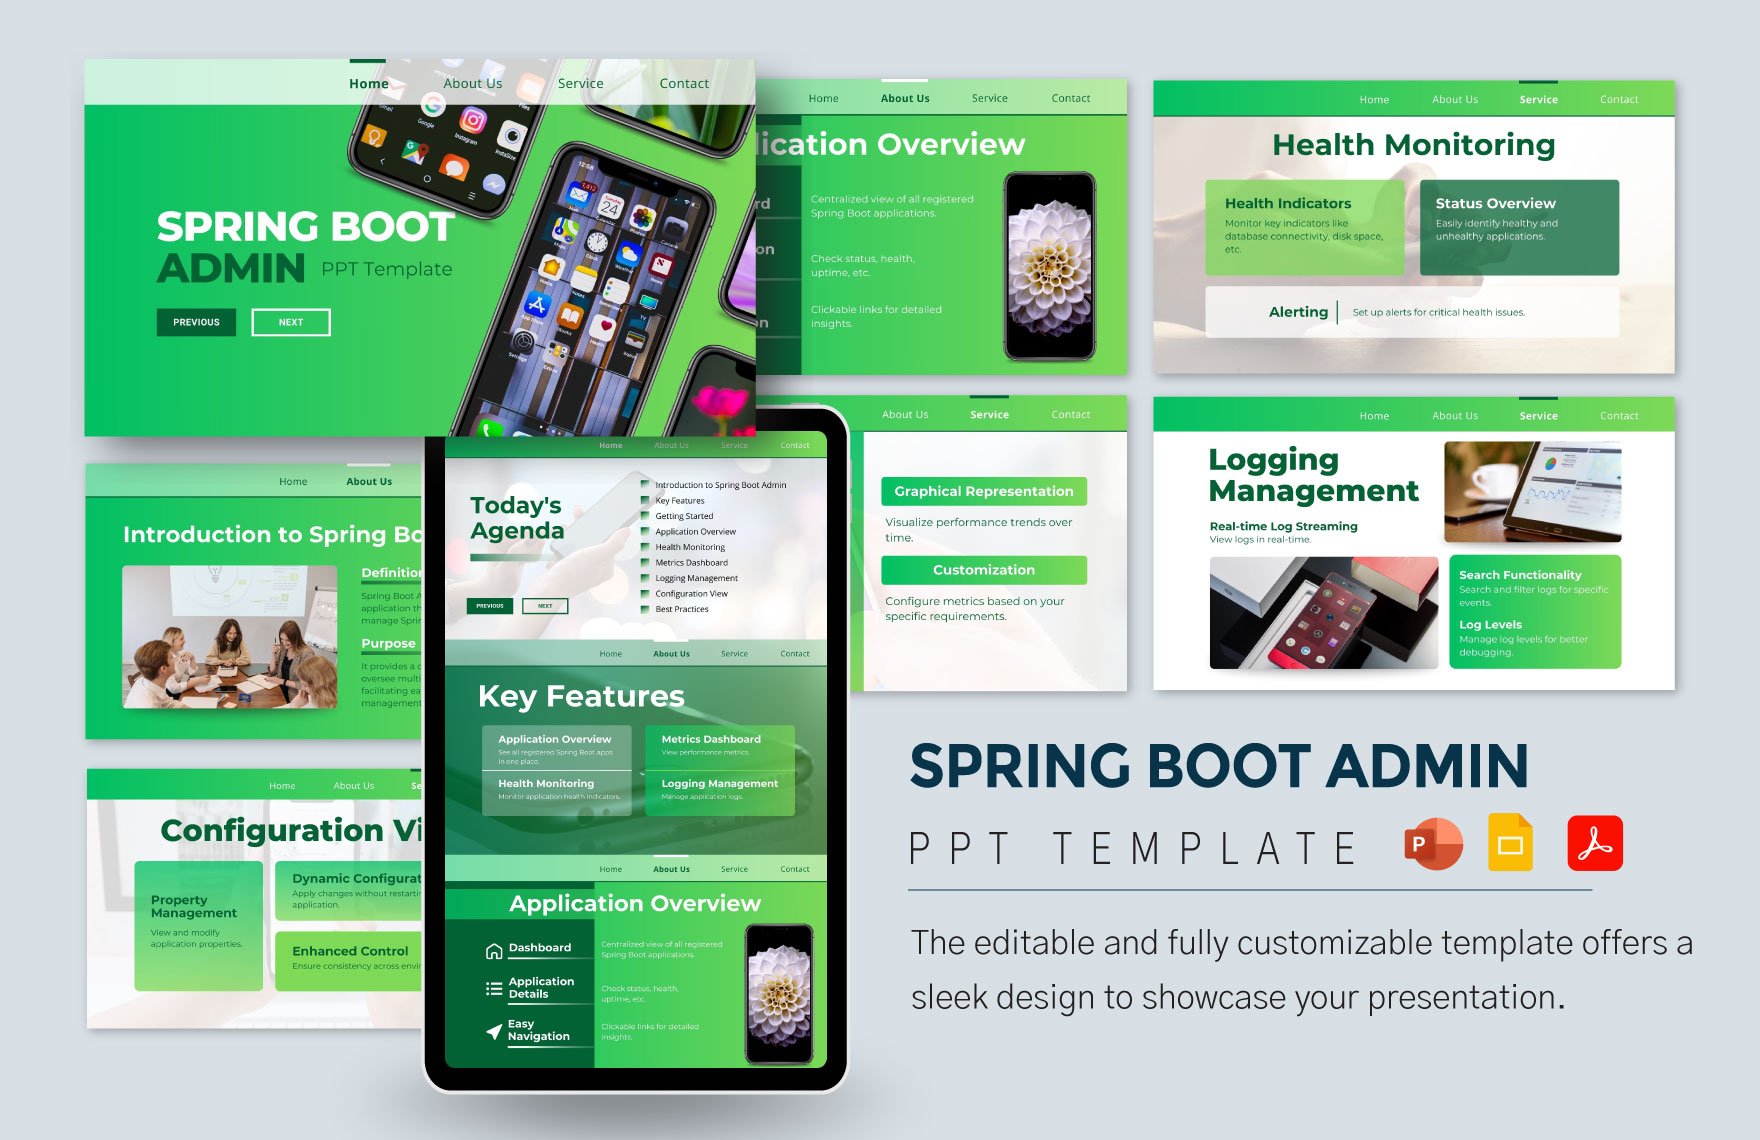 Spring Boot Admin PPT Template